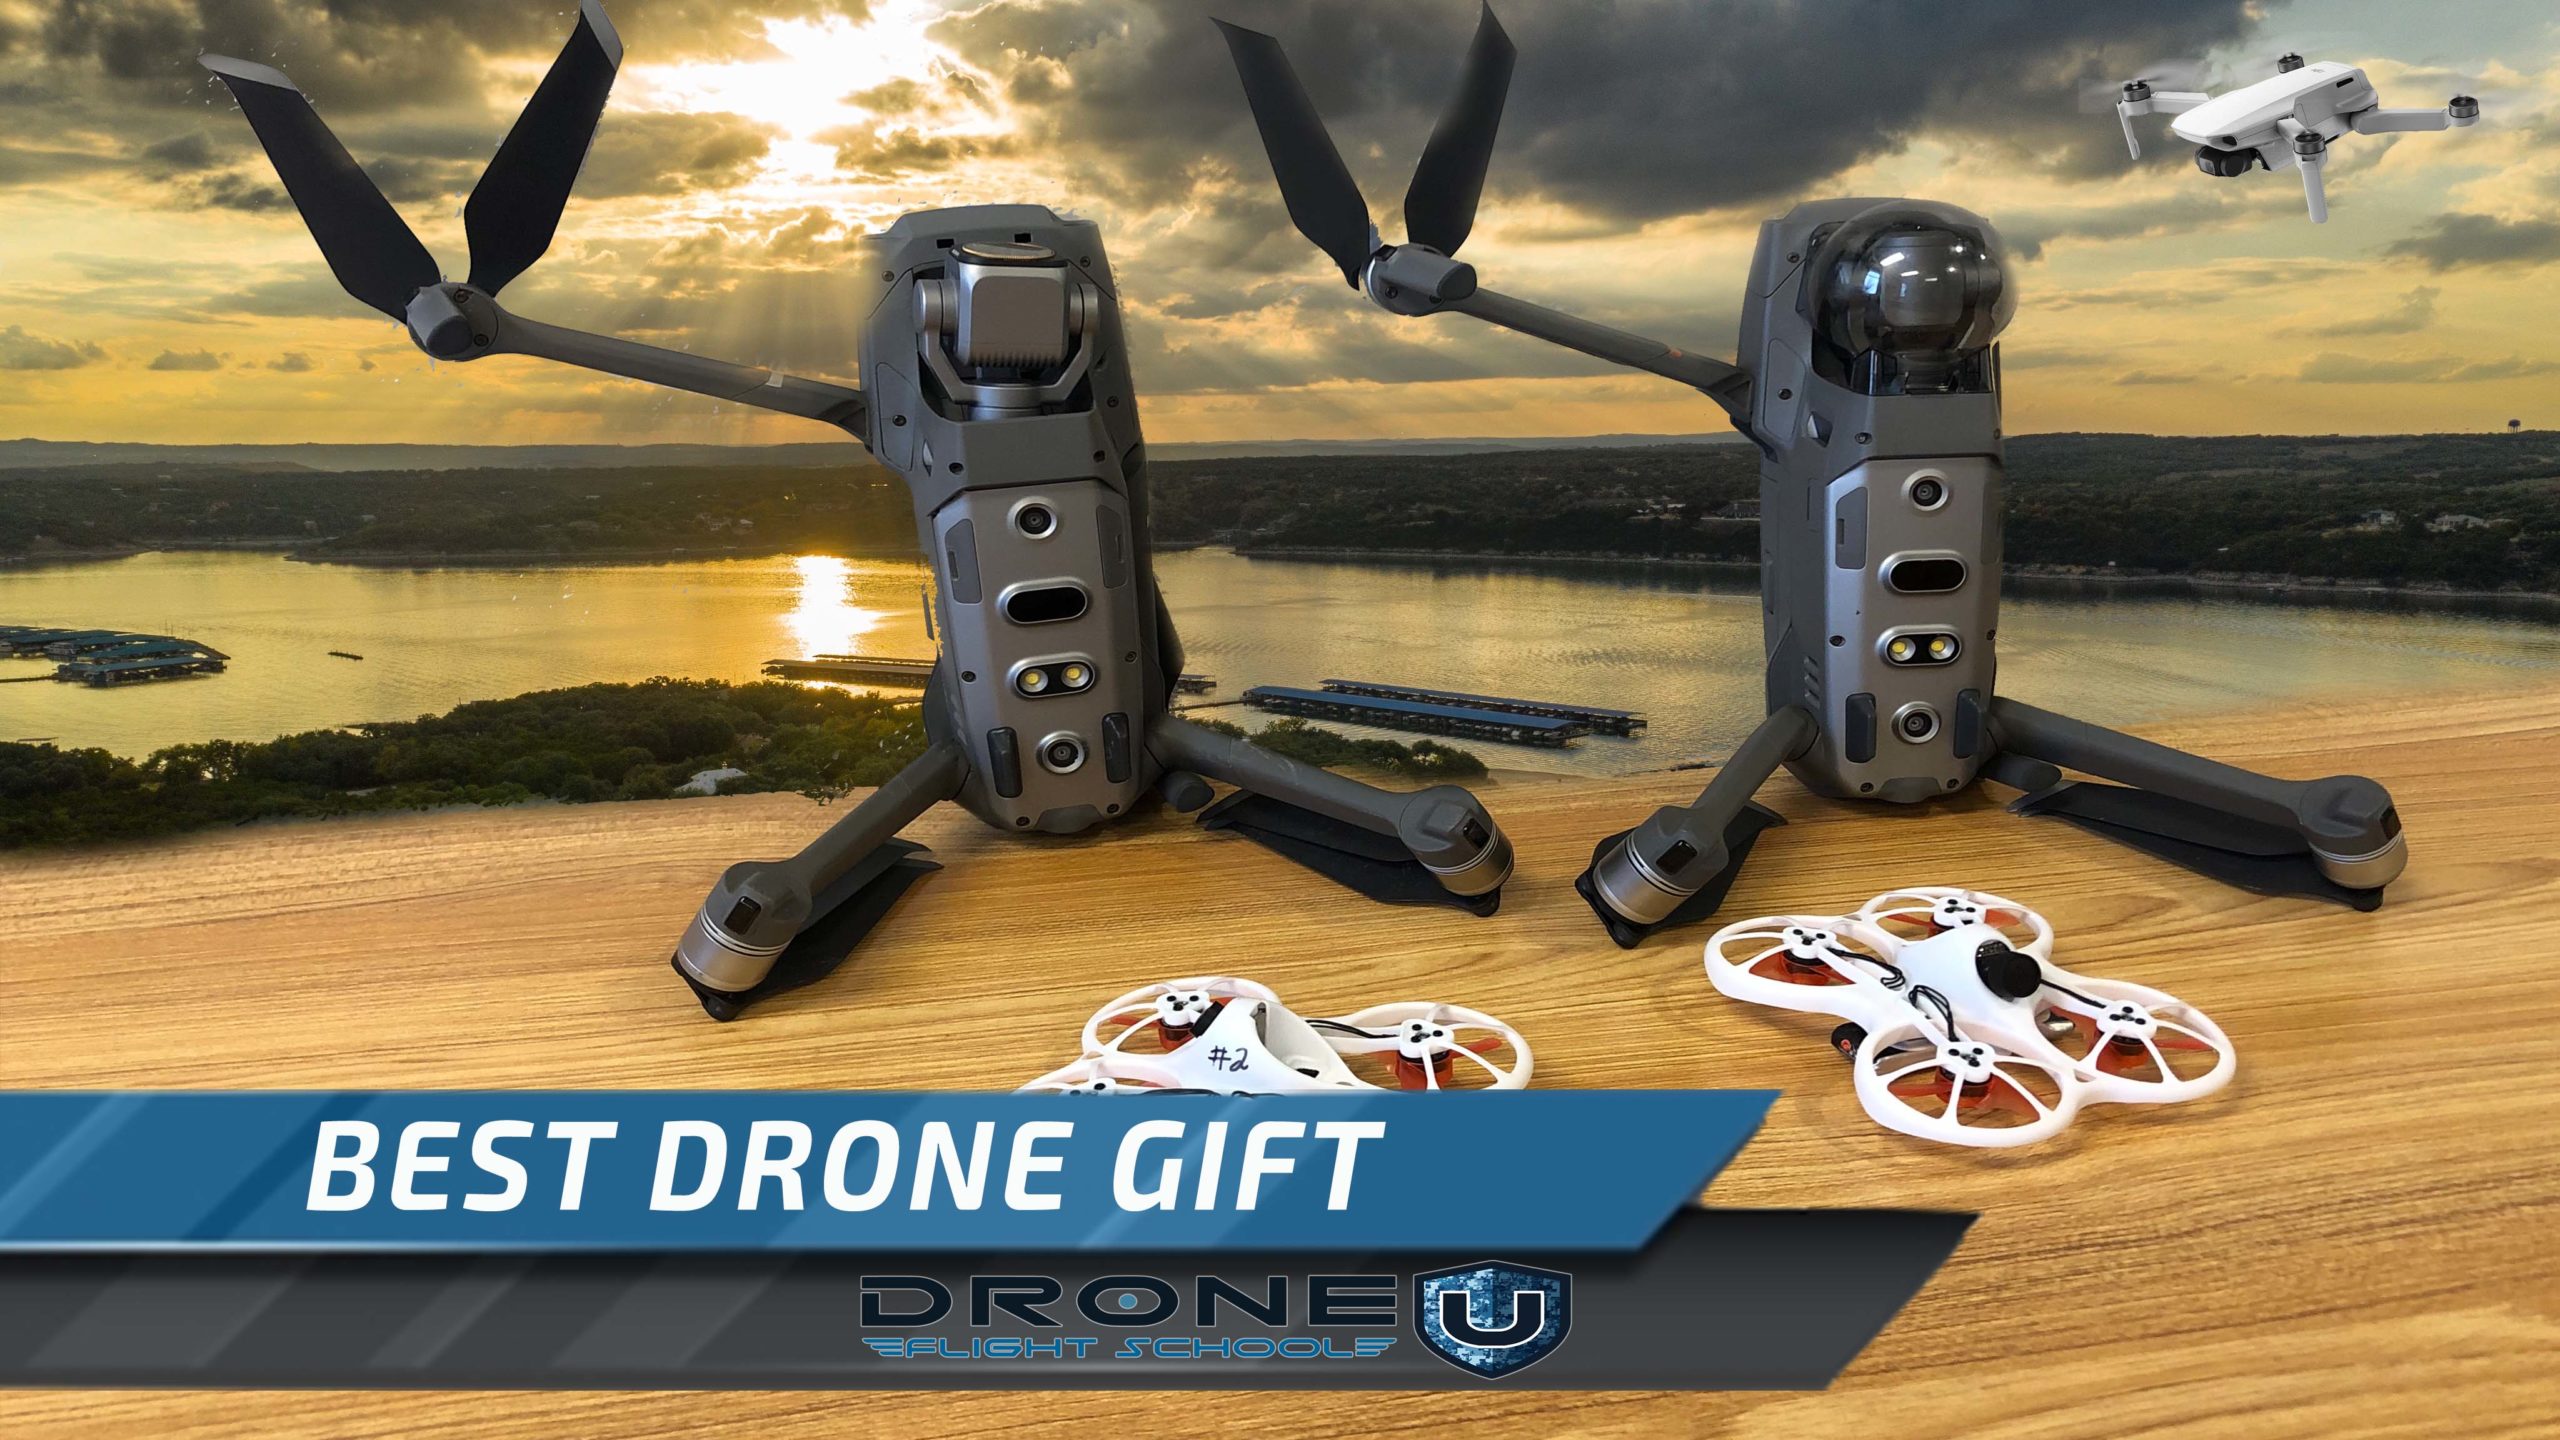 What Is The Best Drone To Gift This Holiday Season Drone U